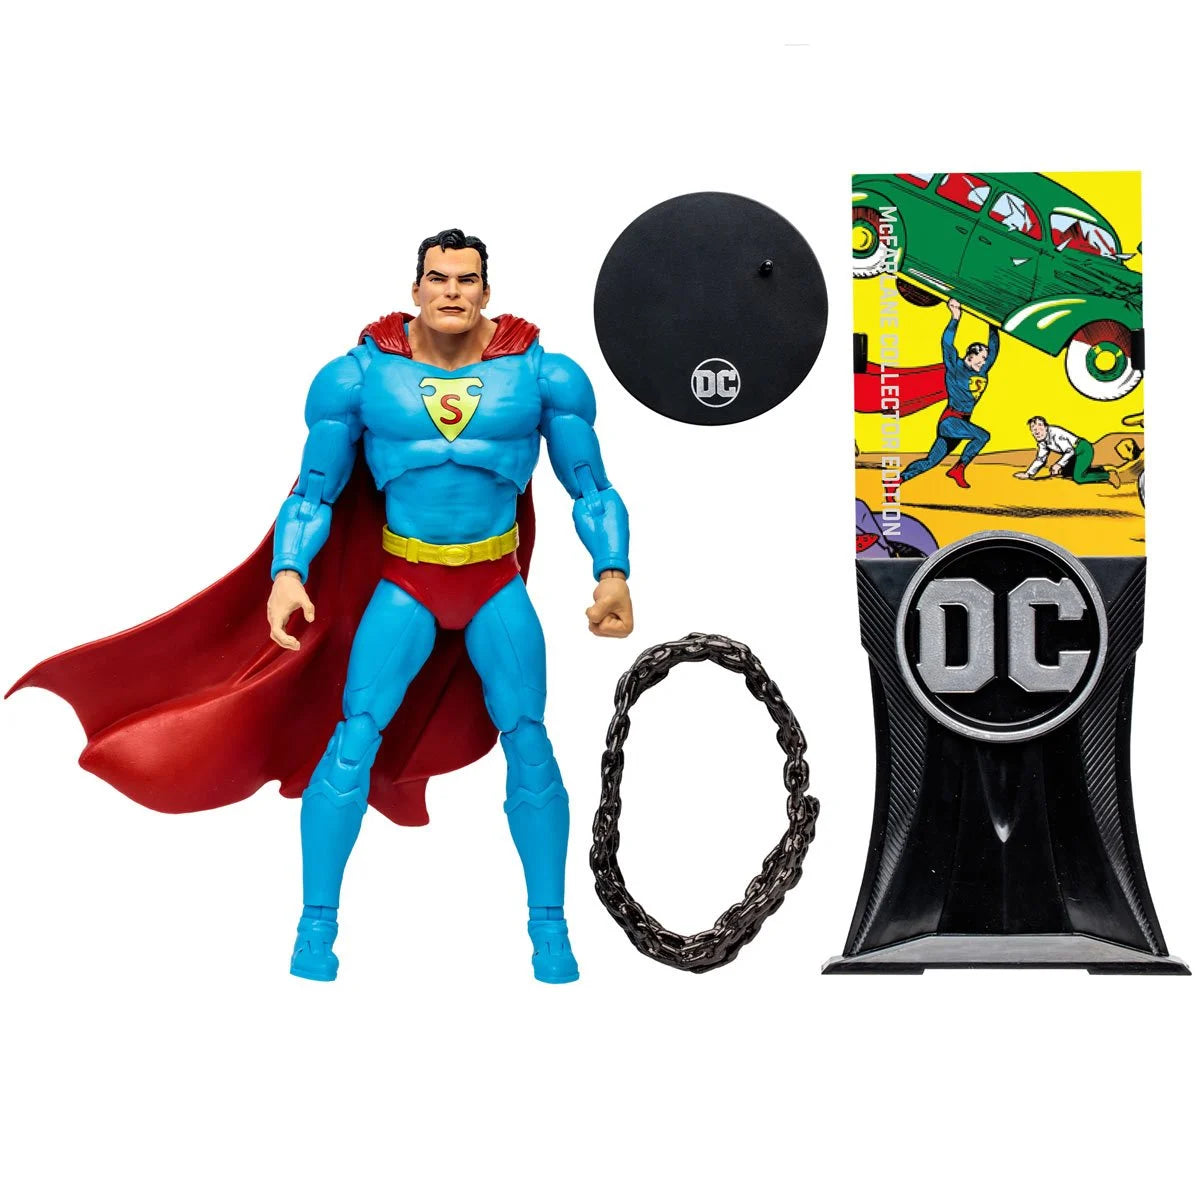 Superman Collector's Edition Action figure with accessories - Heretoserveyou